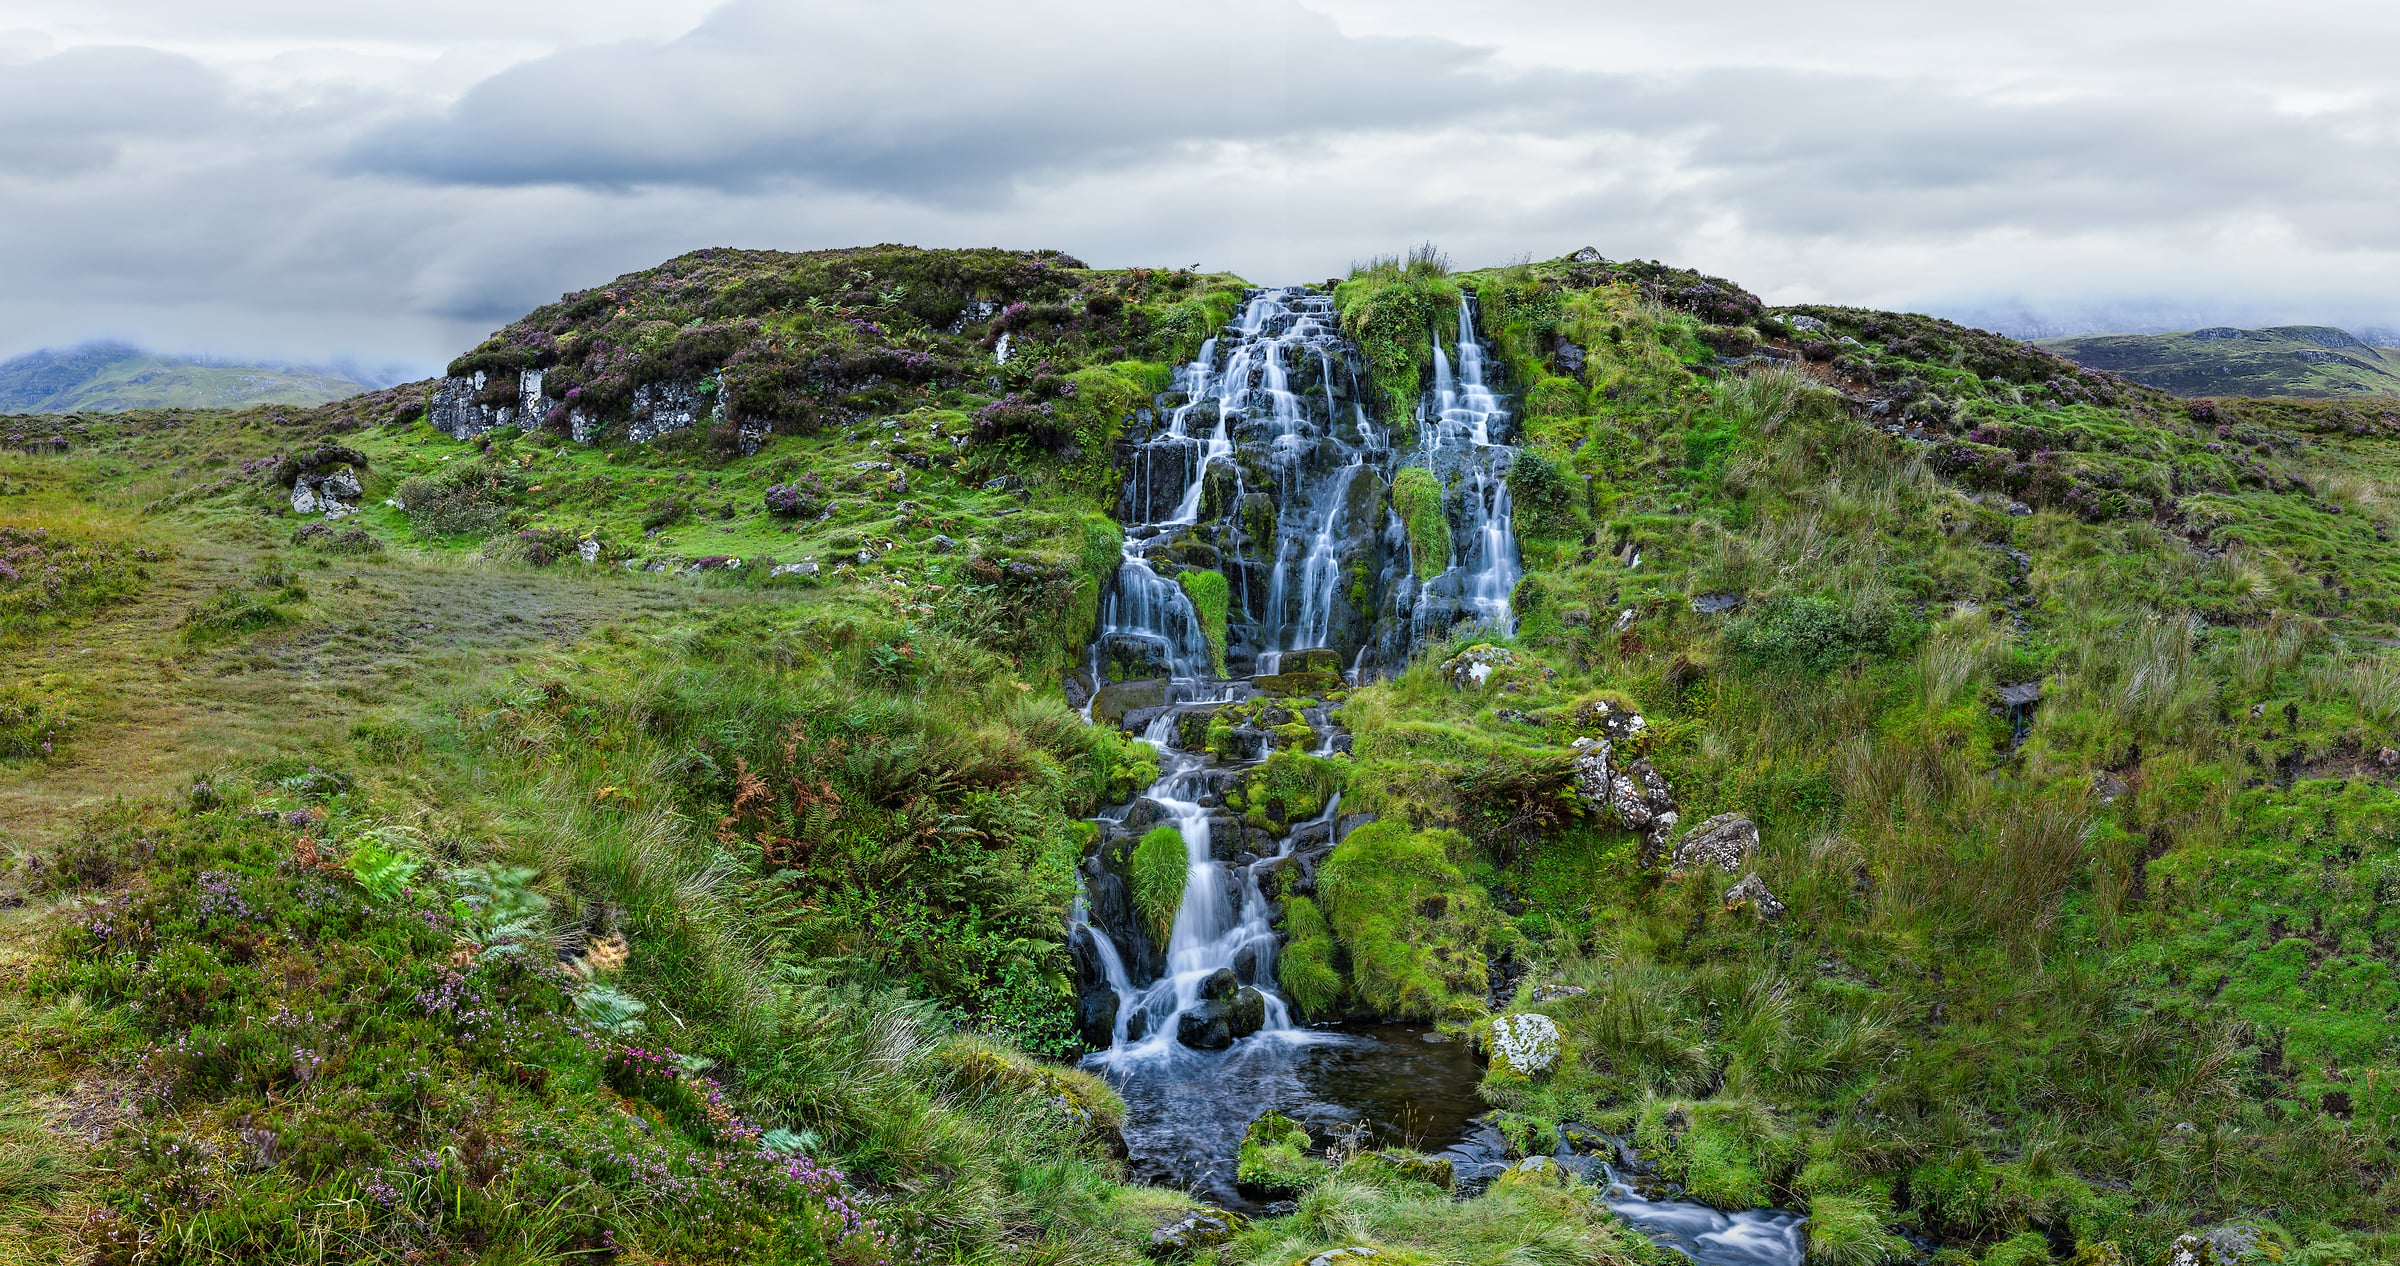 1,548 megapixels! A very high resolution, large-format VAST photo print of a waterfall in Scotland; photograph created by Scott Dimond in Isle of Skye, Scotland